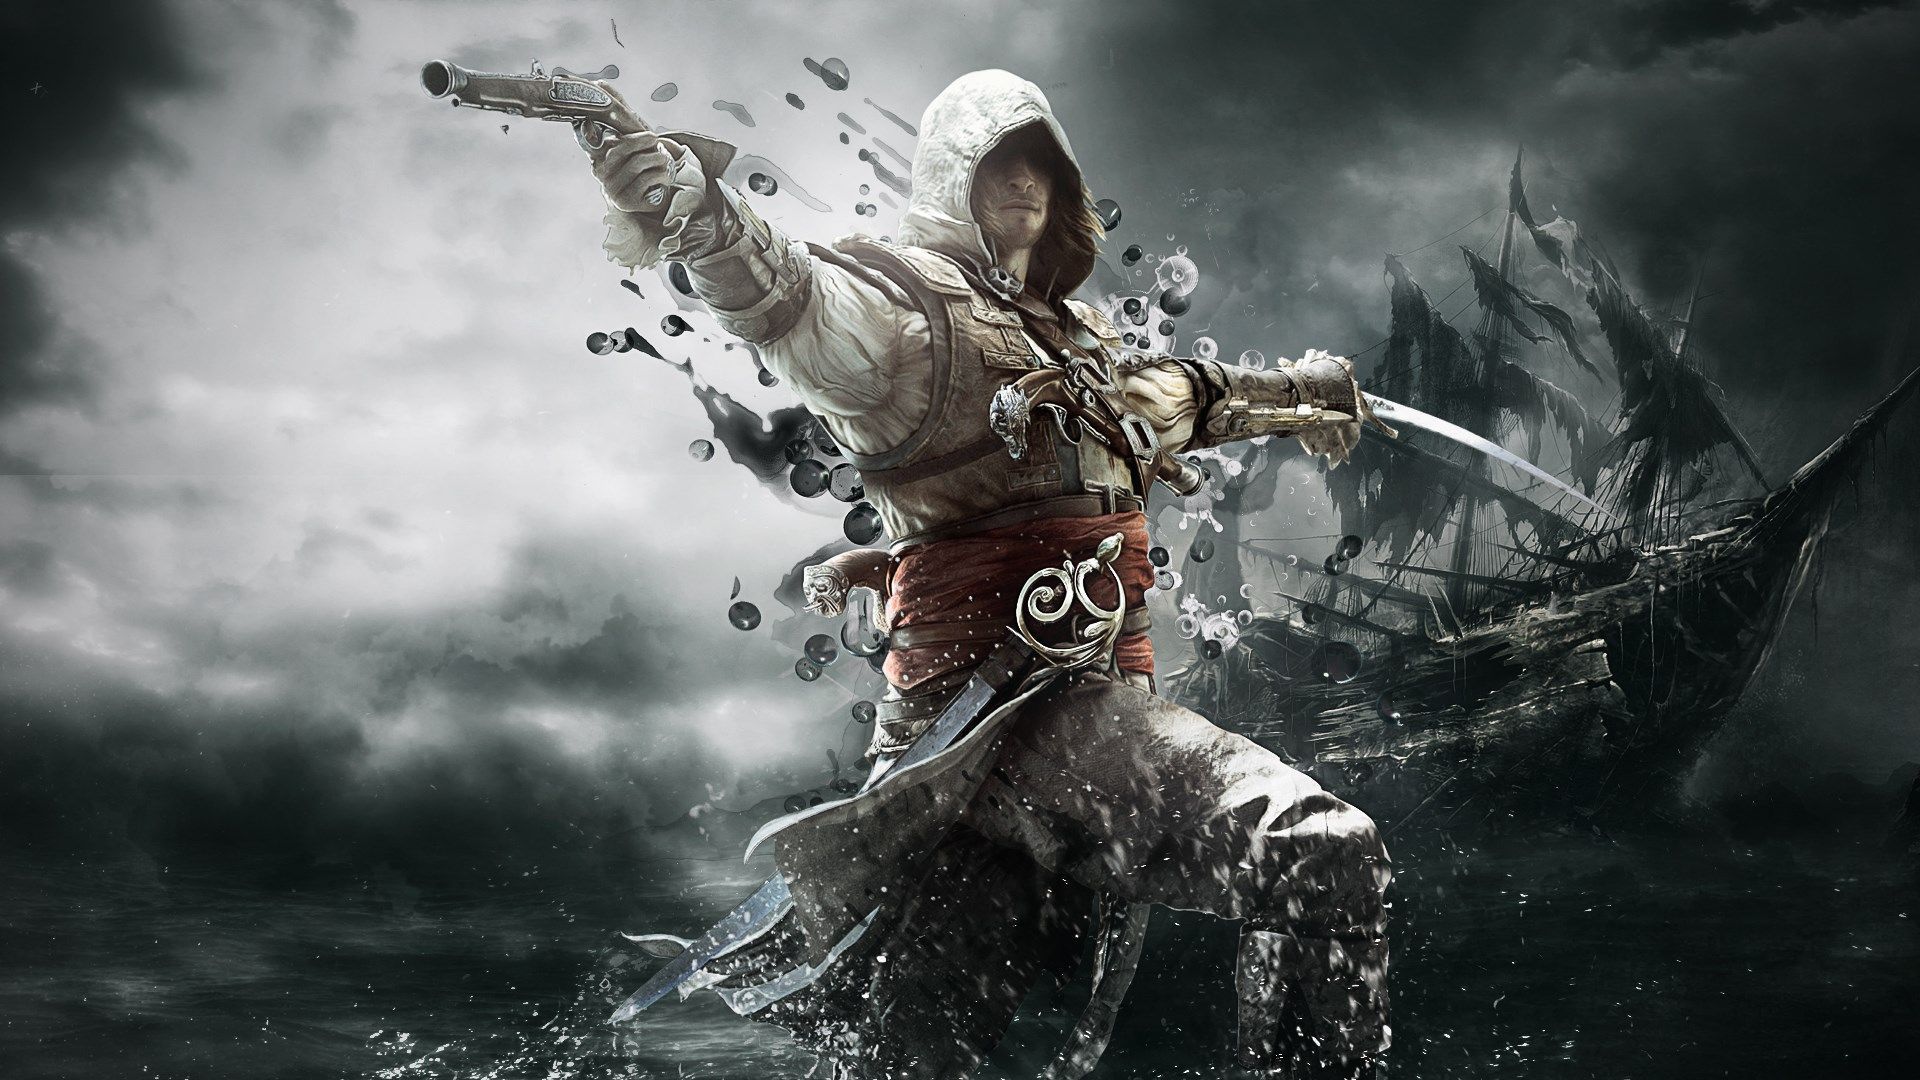 Assassins Creed IV Black Flag HD Wallpapers and Images Free, New